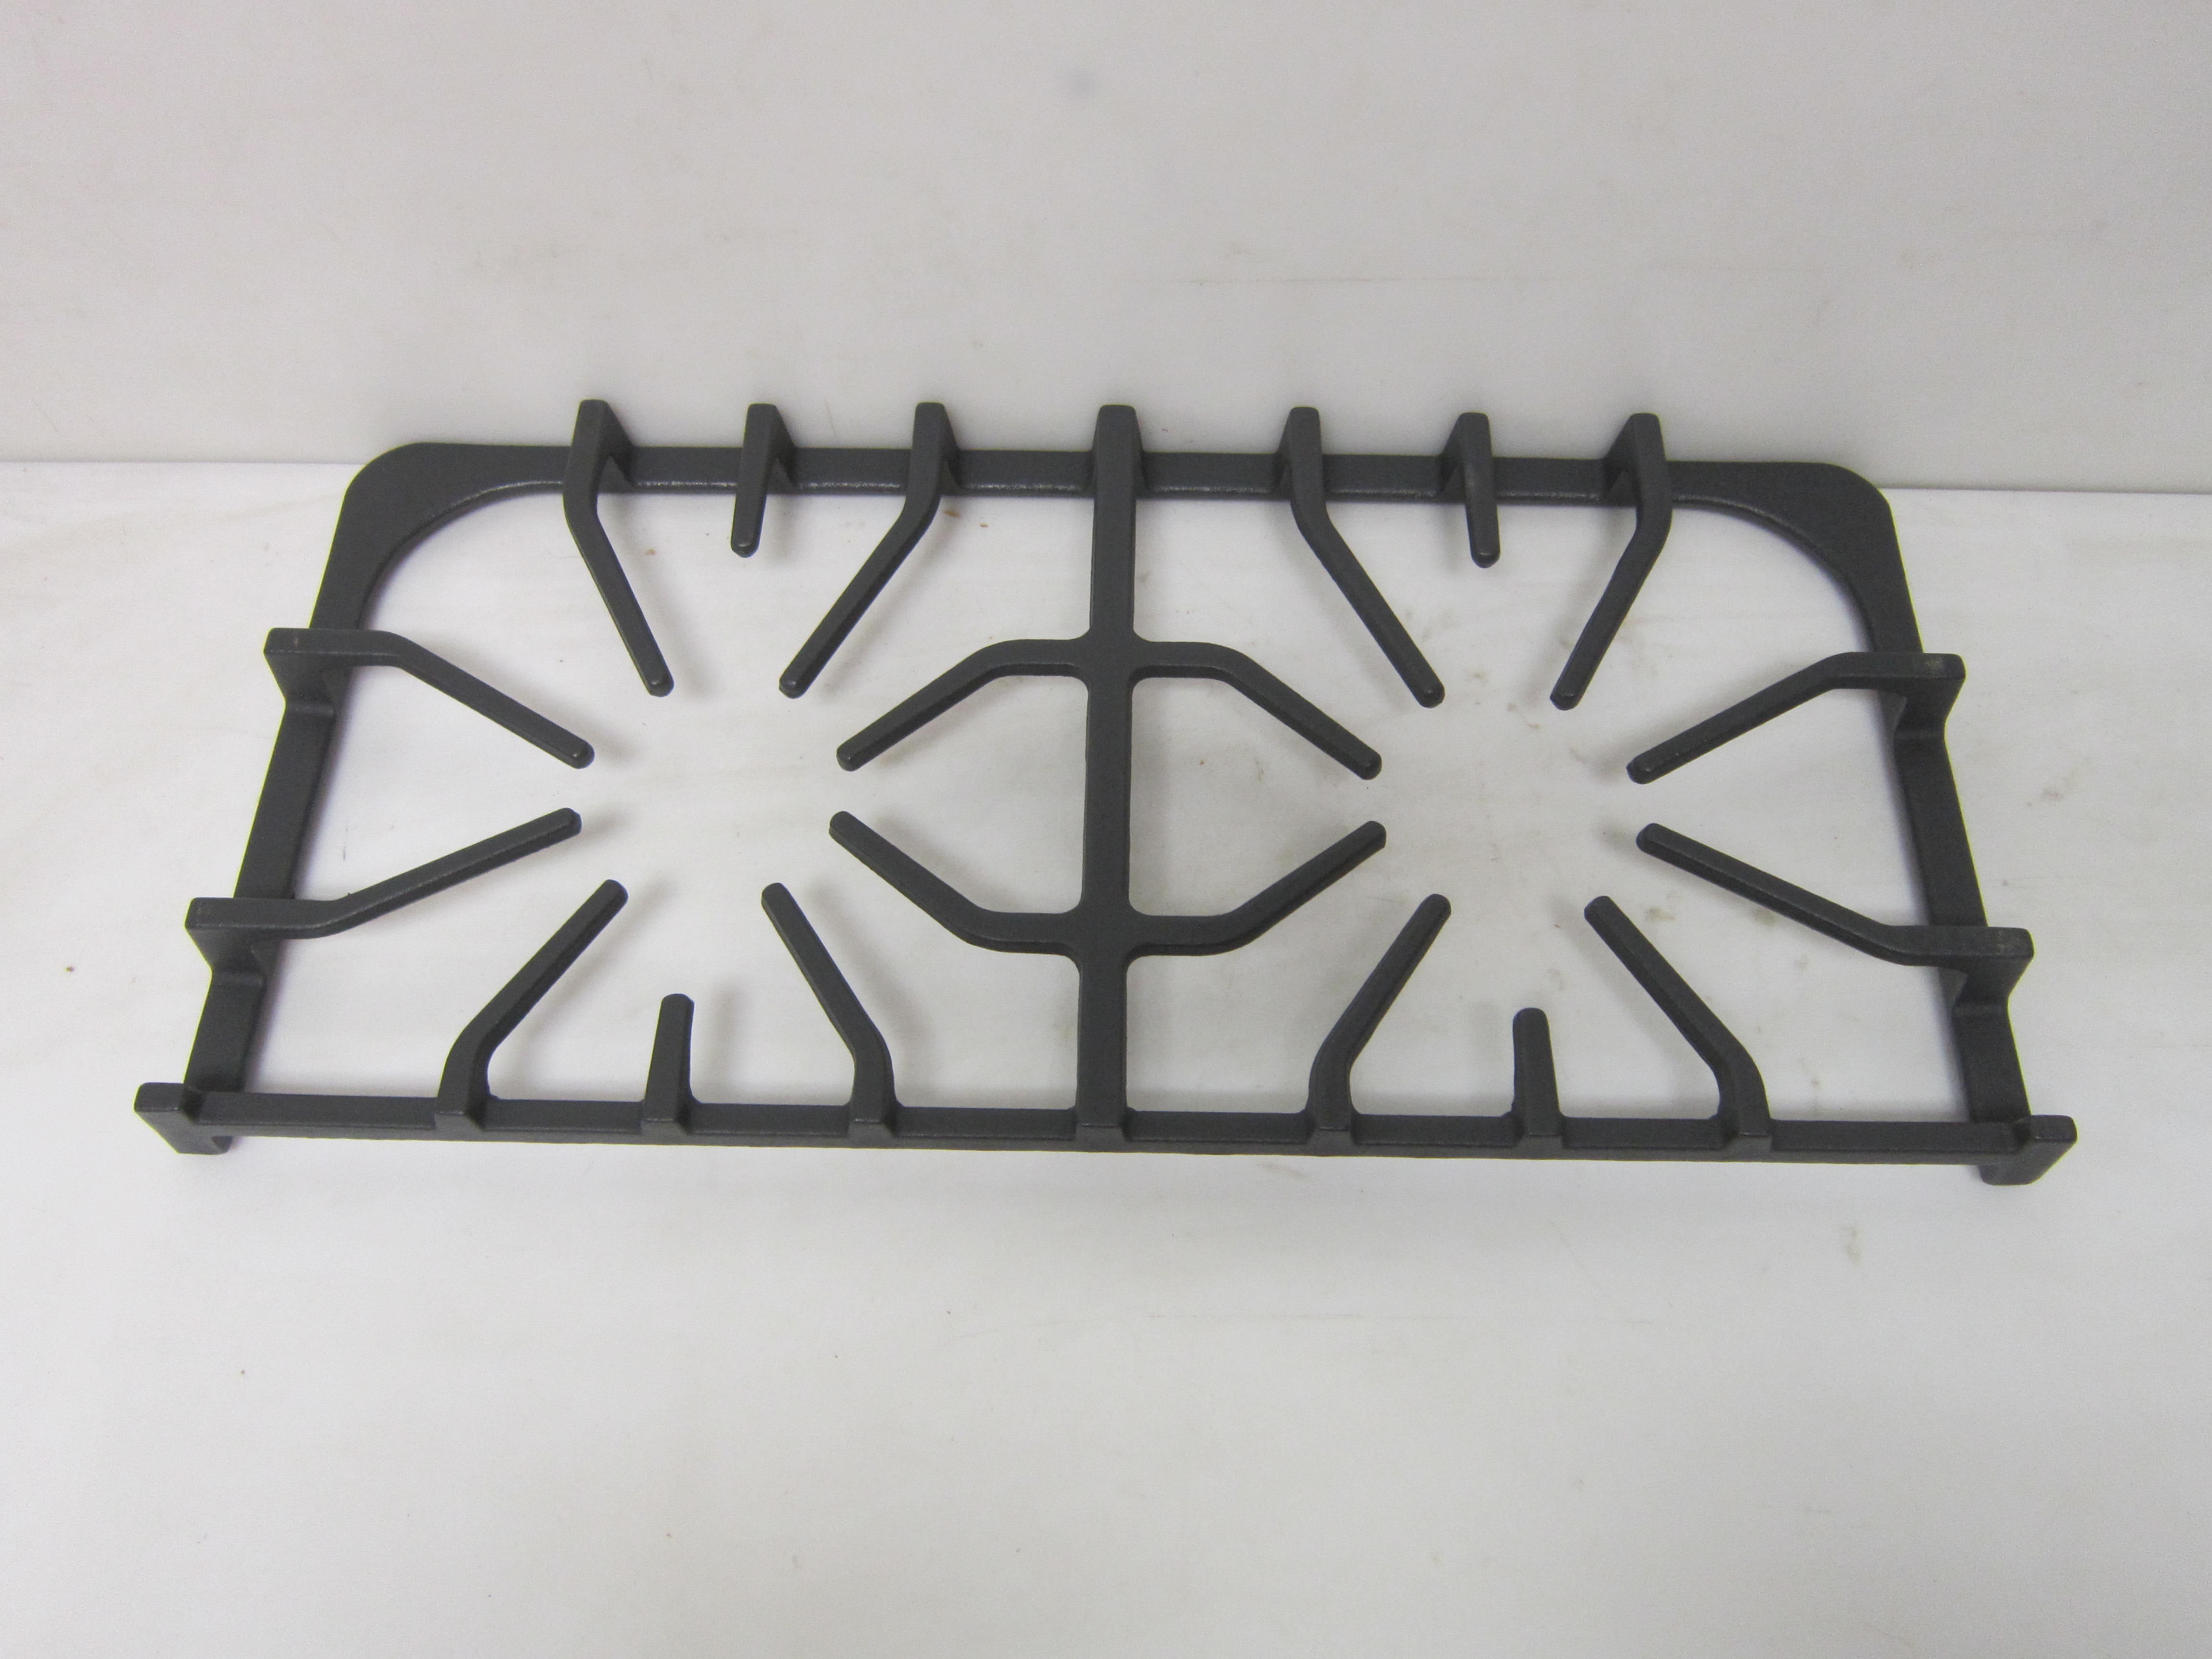 New Frigidaire OEM 318120000 Gas Cooktop Grate Fits 5995287991